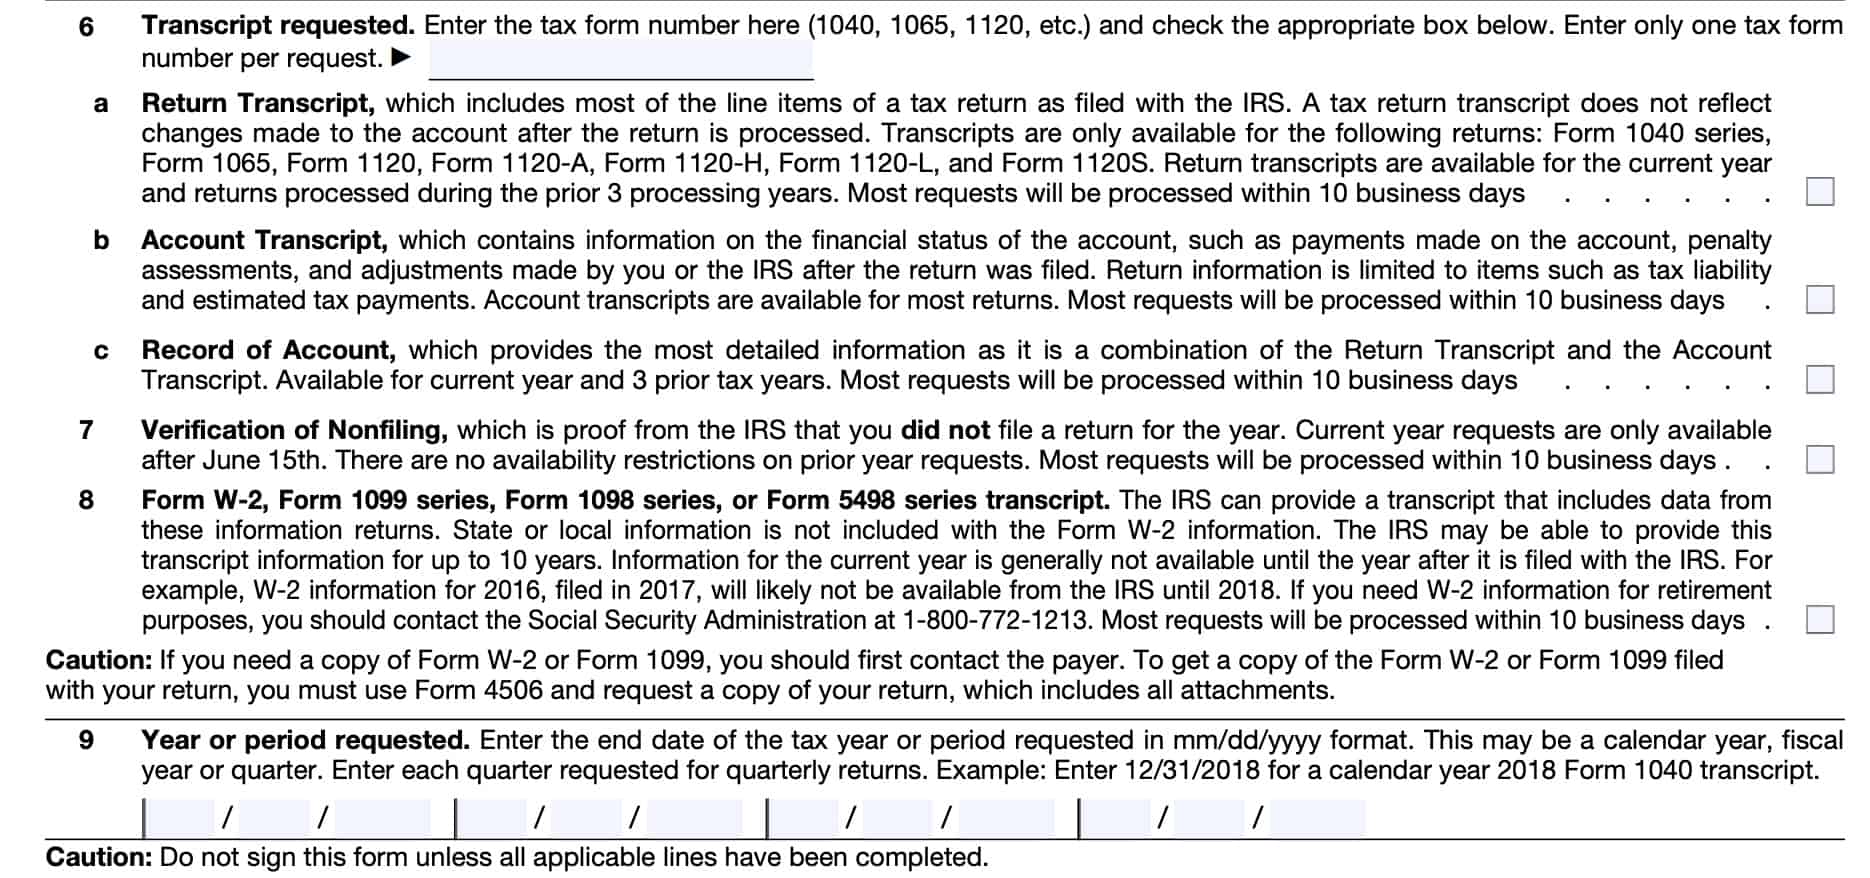 Form 4506-T, request information